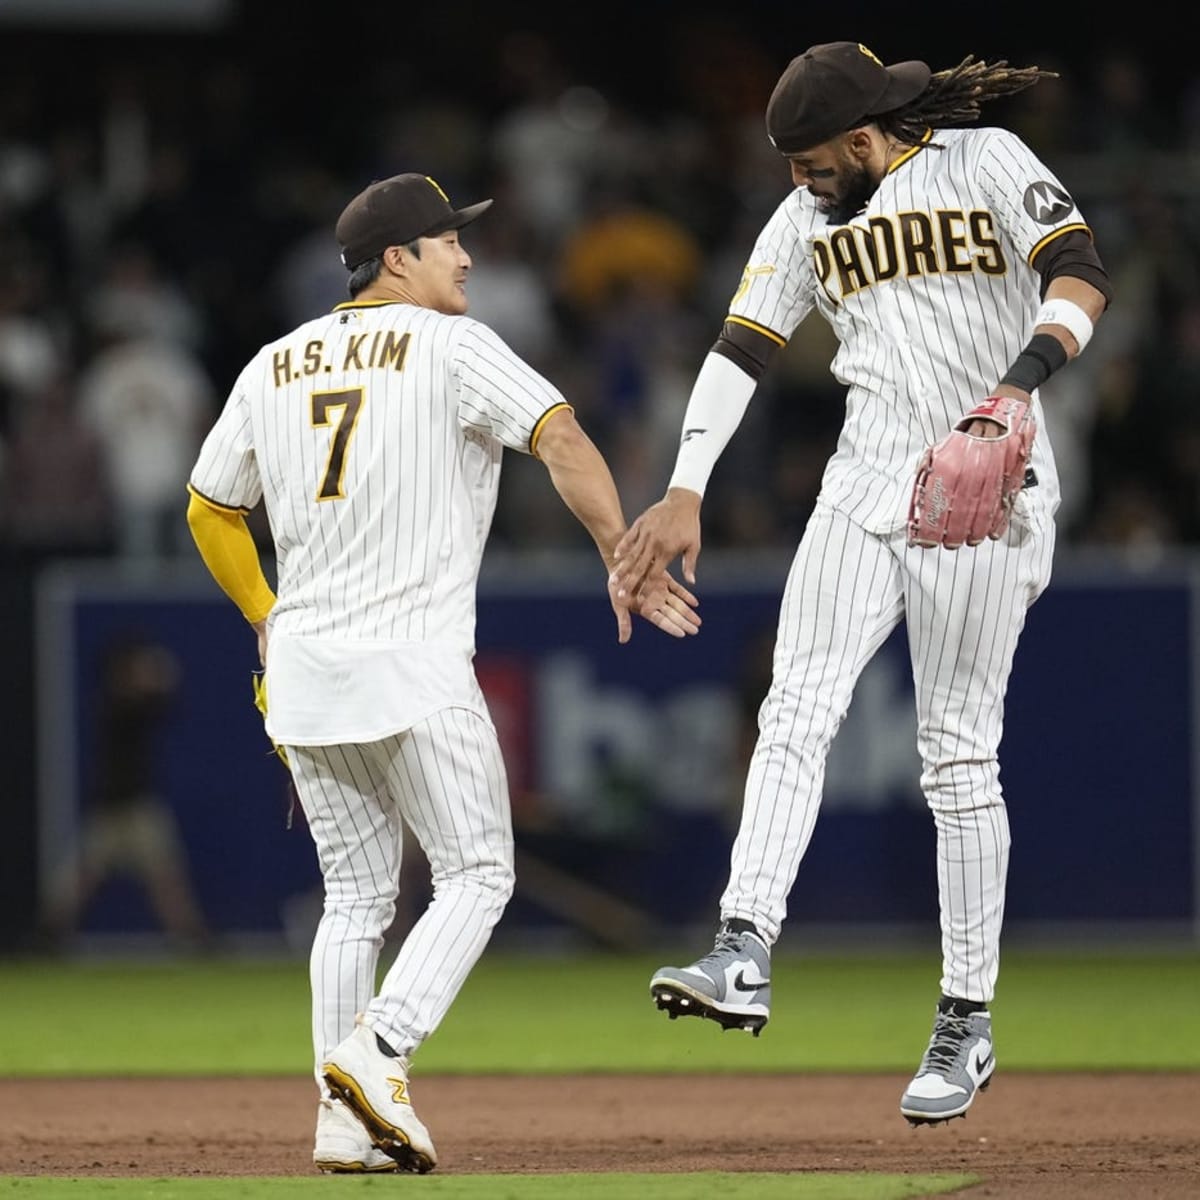 Rockies at Padres Free Live Stream MLB Online, Channel, Time - How to Watch and Stream Major League and College Sports